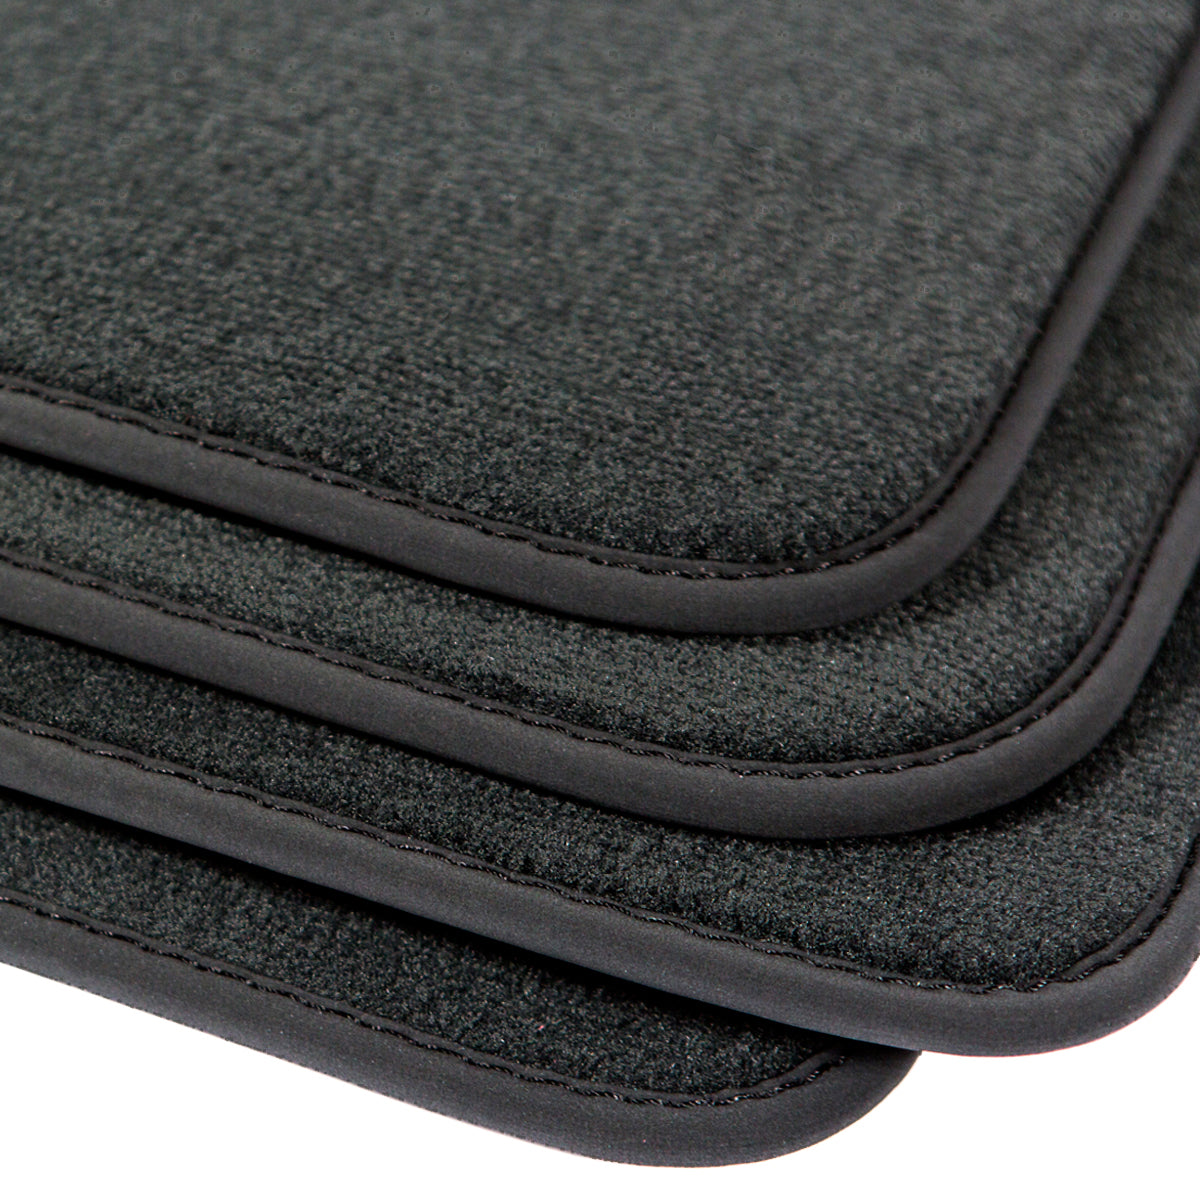 Choose Floor Mats That Fit Your BMW X3 Perfectly